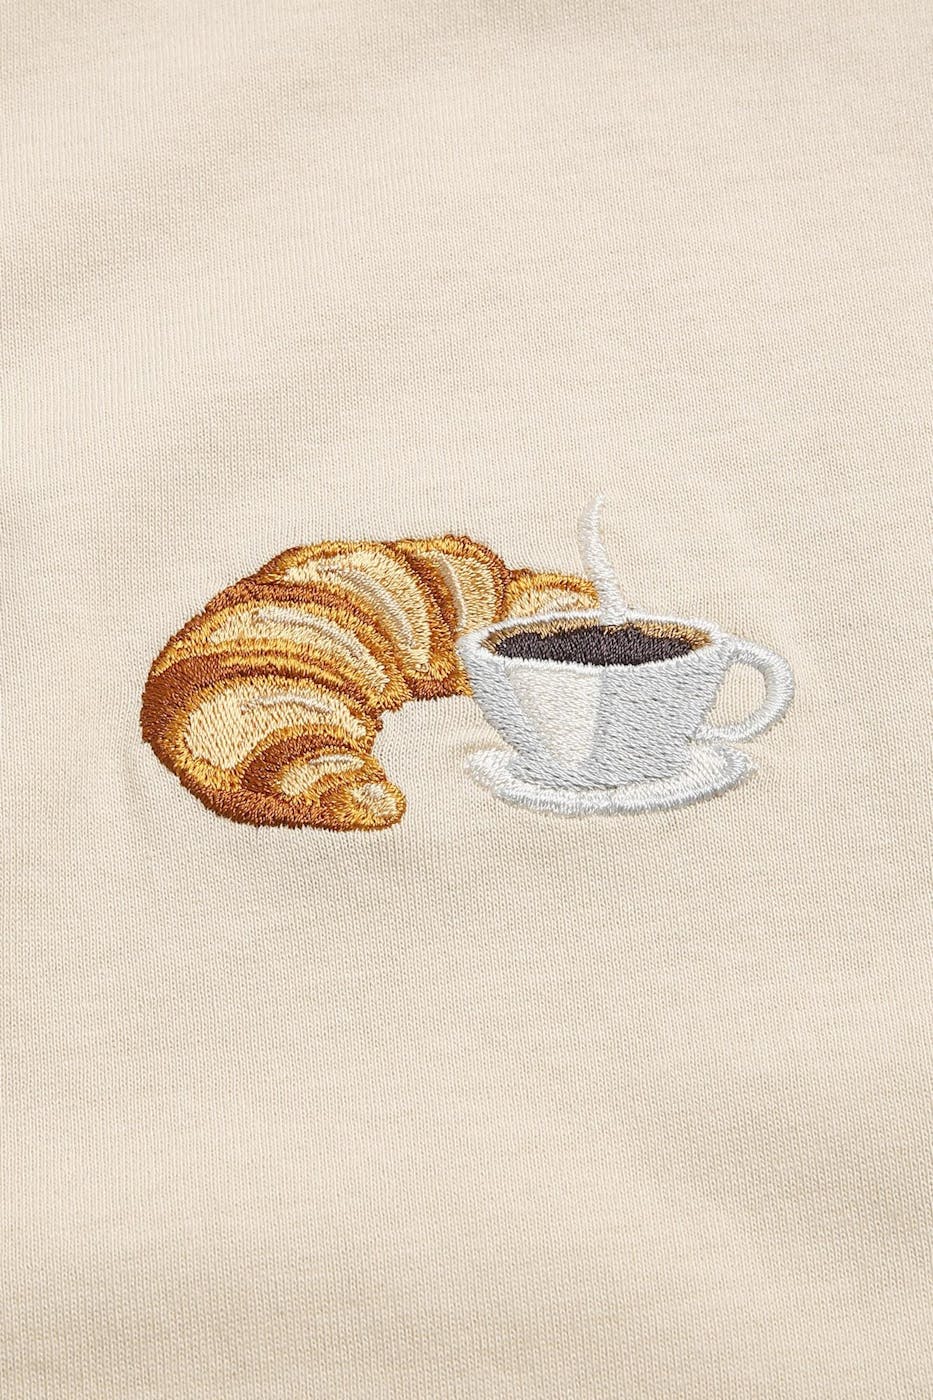 Antwrp - Nude Coffee Croissant T-shirt